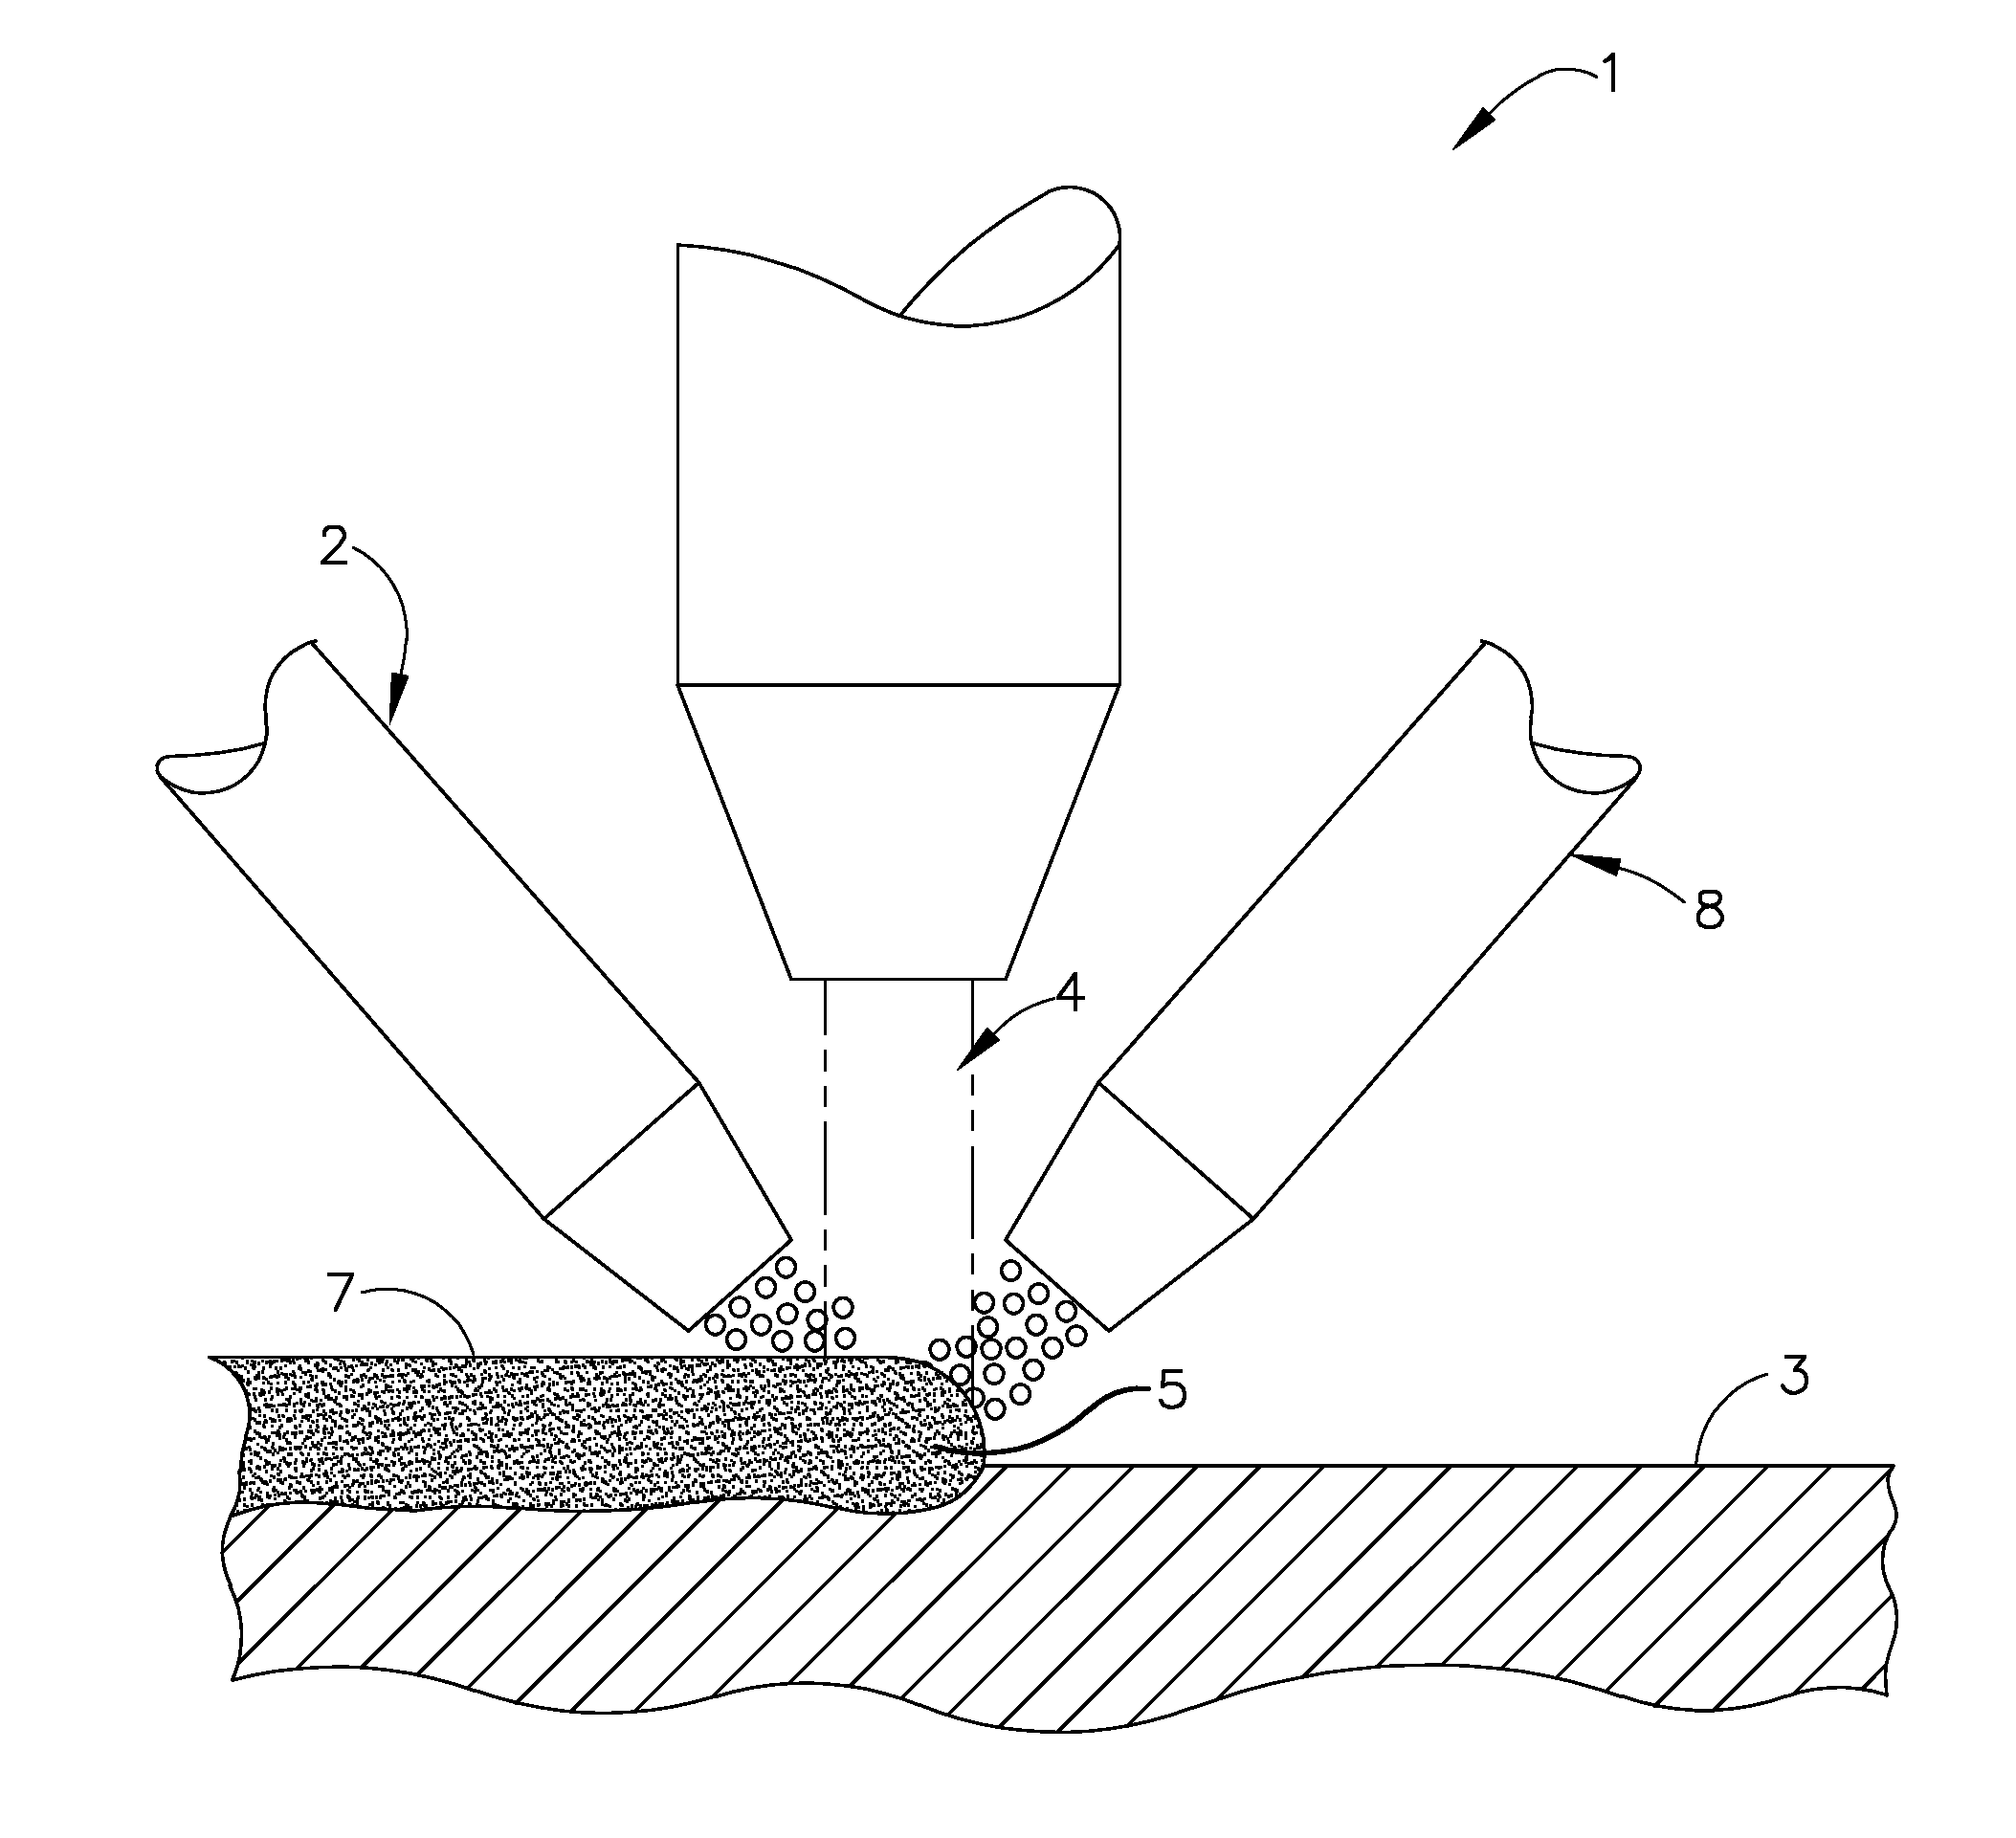 Laser net shape manufacturing and repair using a medial axis toolpath deposition method